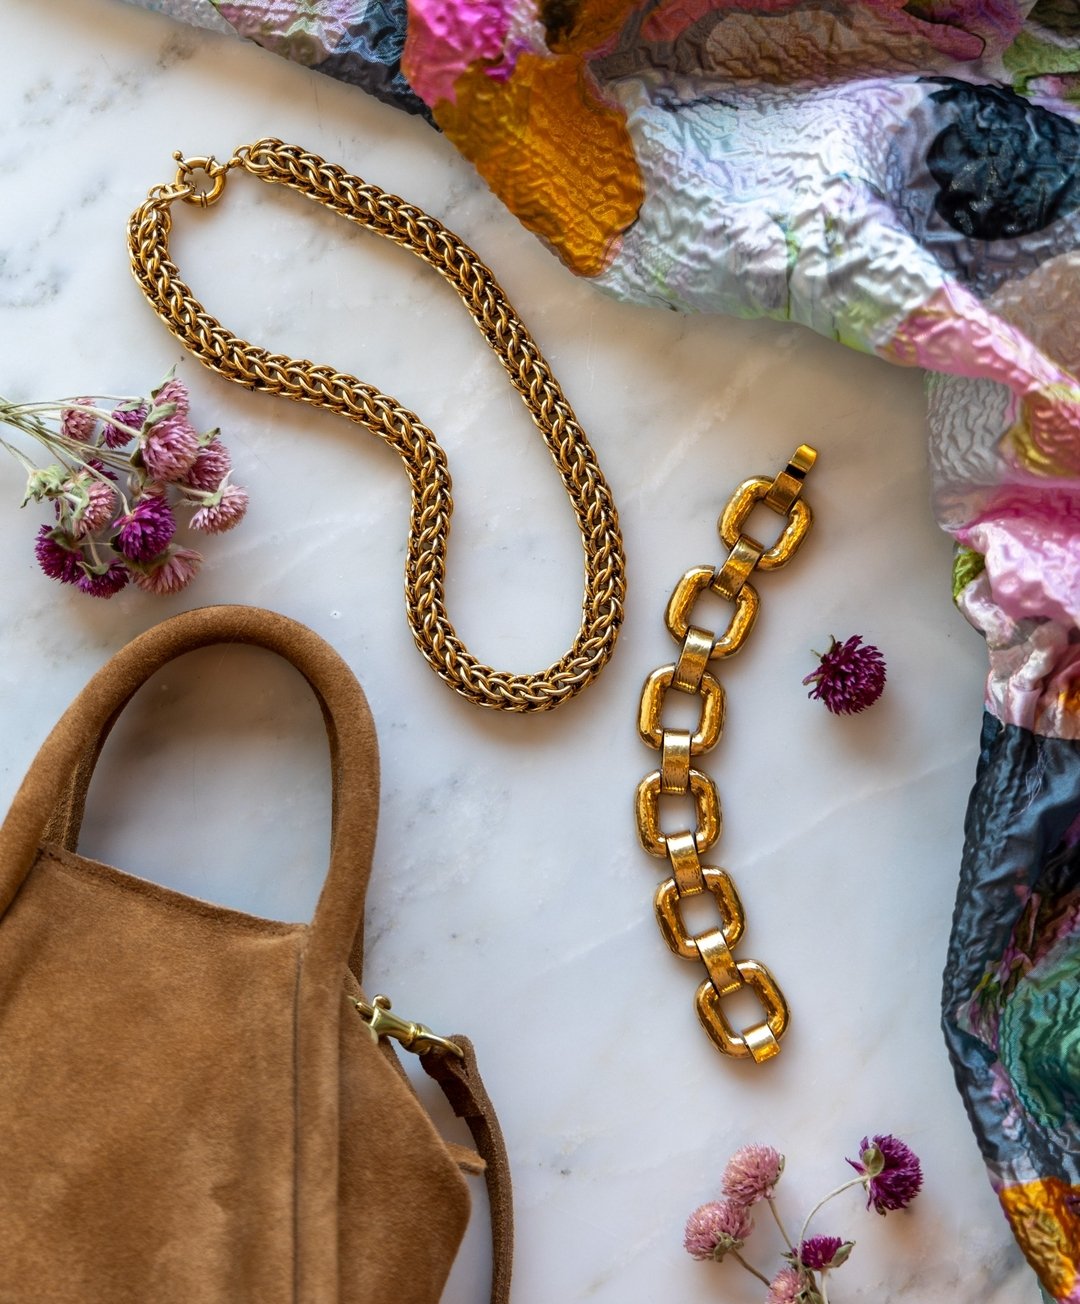 Our Mother's Day Gift Guide is here!​​​​​​​​
Time to make your wishlist, Mama!​​​​​​​​
​​​​​​​​
As always, complimentary gift wrap and shipping.​​​​​​​​
​​​​​​​​
#exvotovintage #exvoto #apparel #jewelry #brand #timeless #inspiration #femalefounded #e